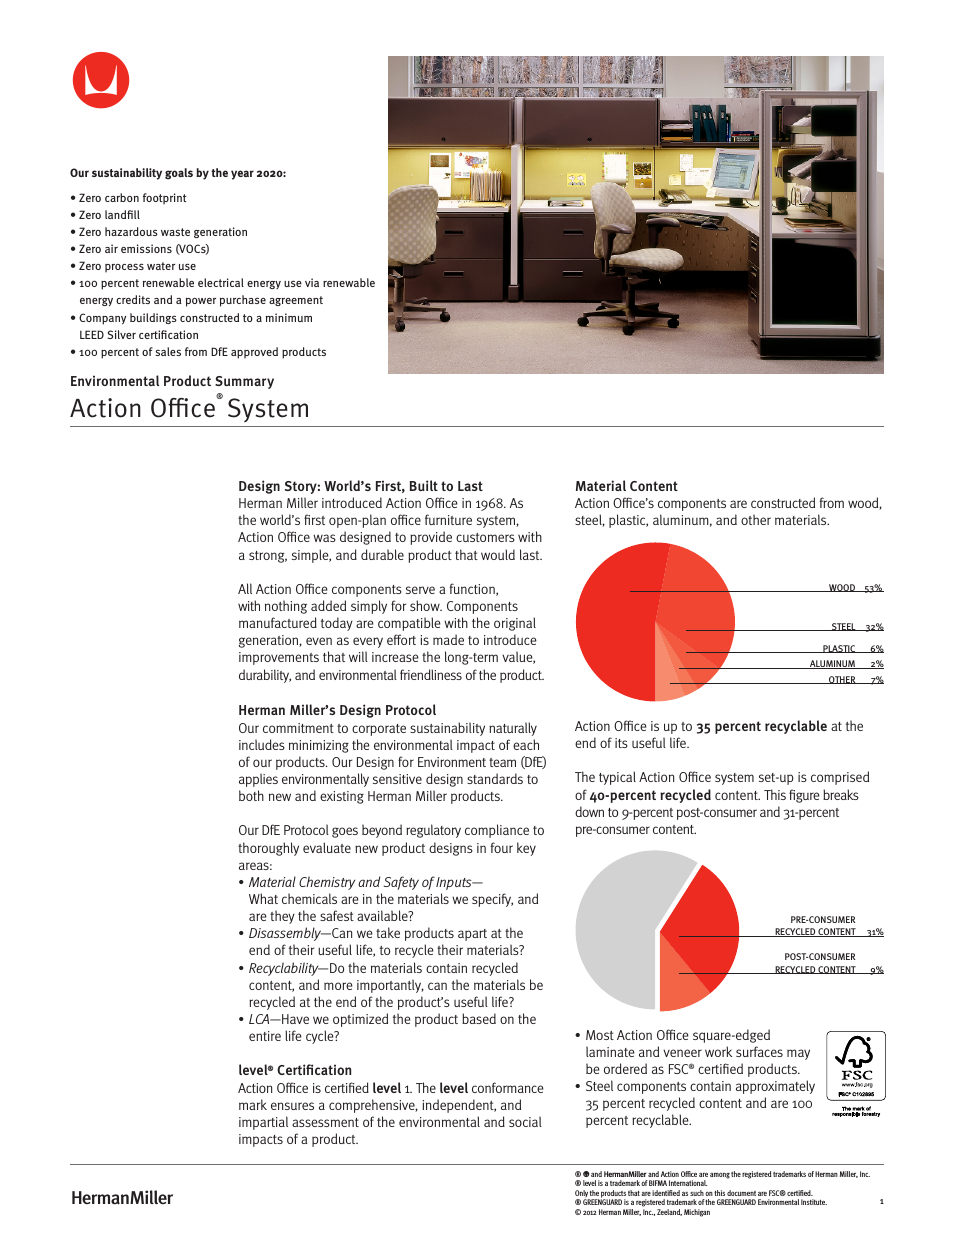 Action Office System - Environmental Product Summary